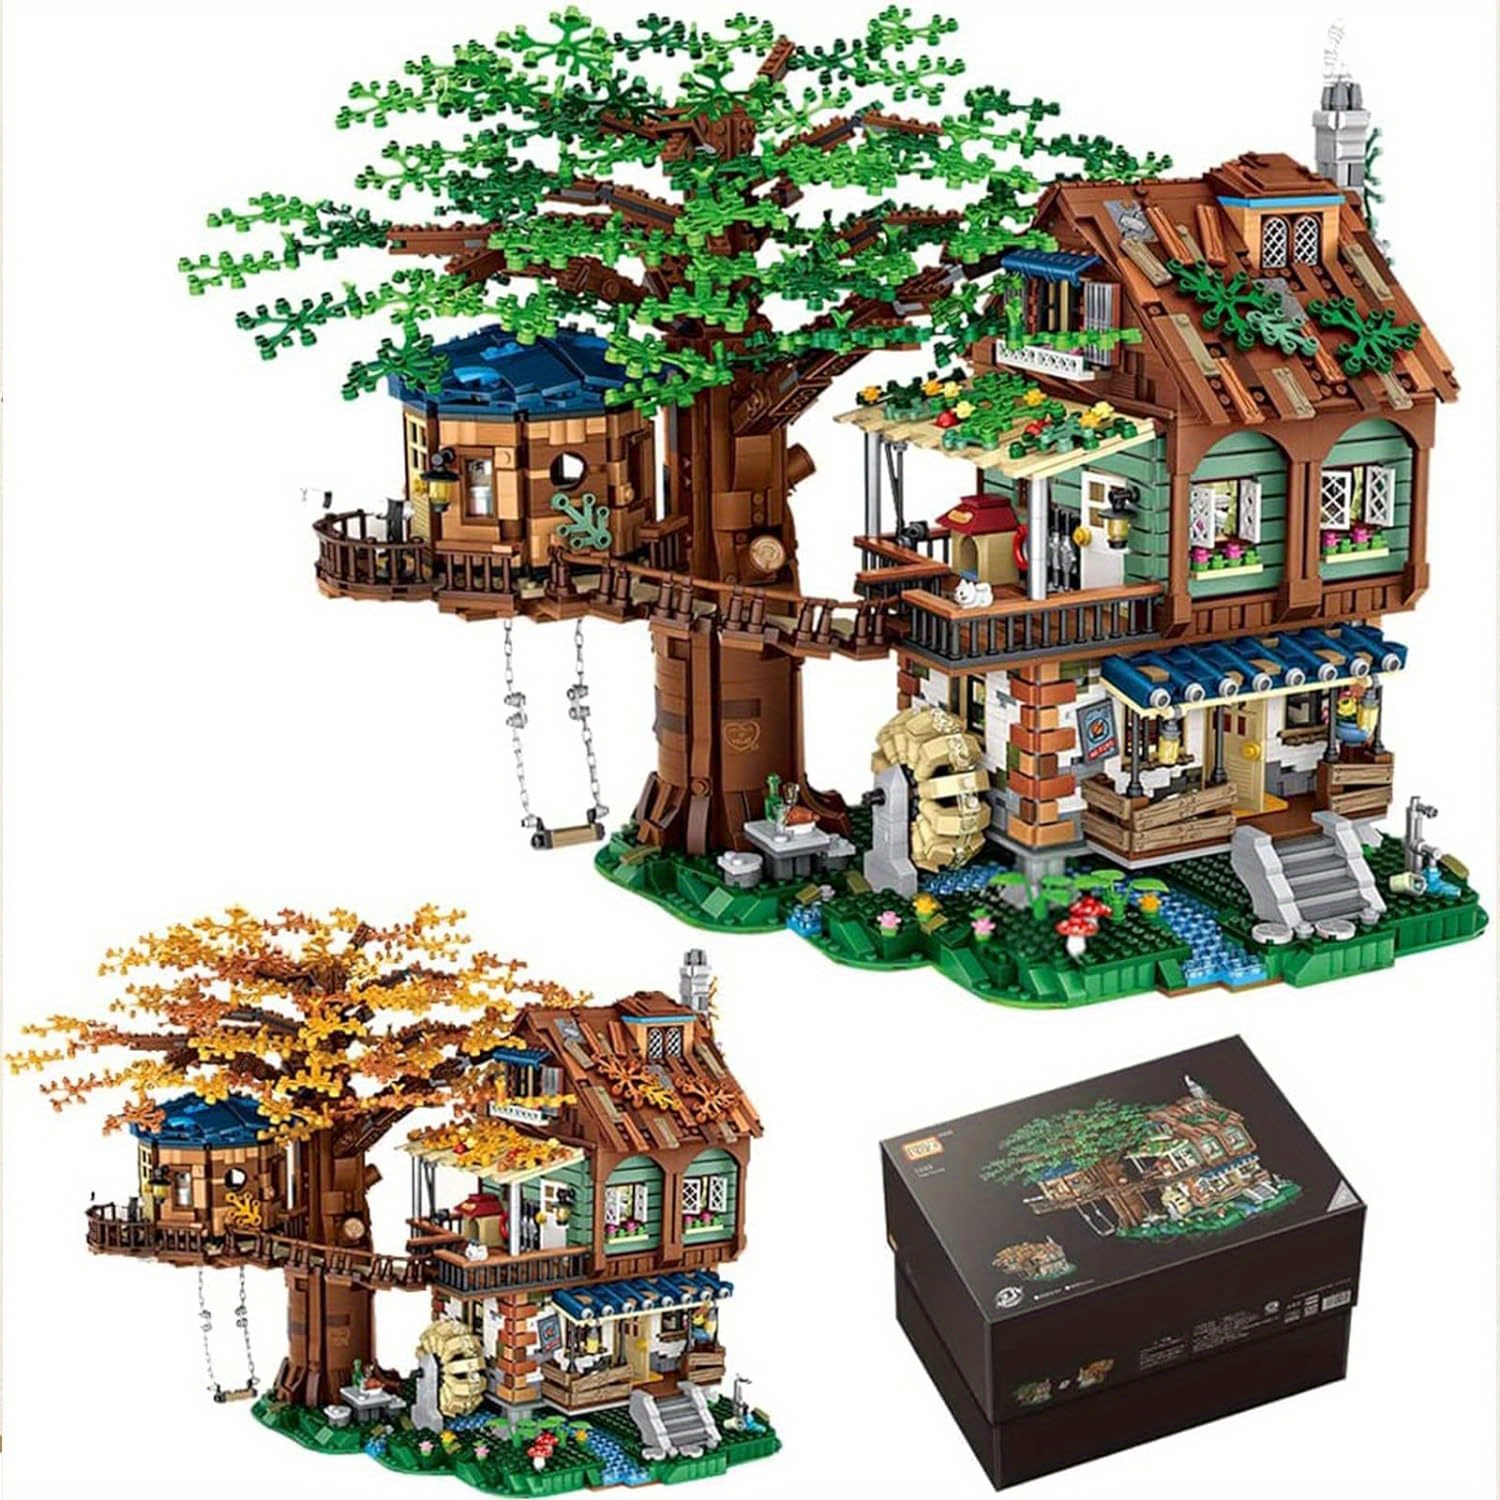 

4761pcs Build And Display Challenge House Blocks Kit For Teen Boy Girl Age 14+ Enjoy Creative Adventure Toy Gift, Idea Tree House Model Building Toy Set For Adult